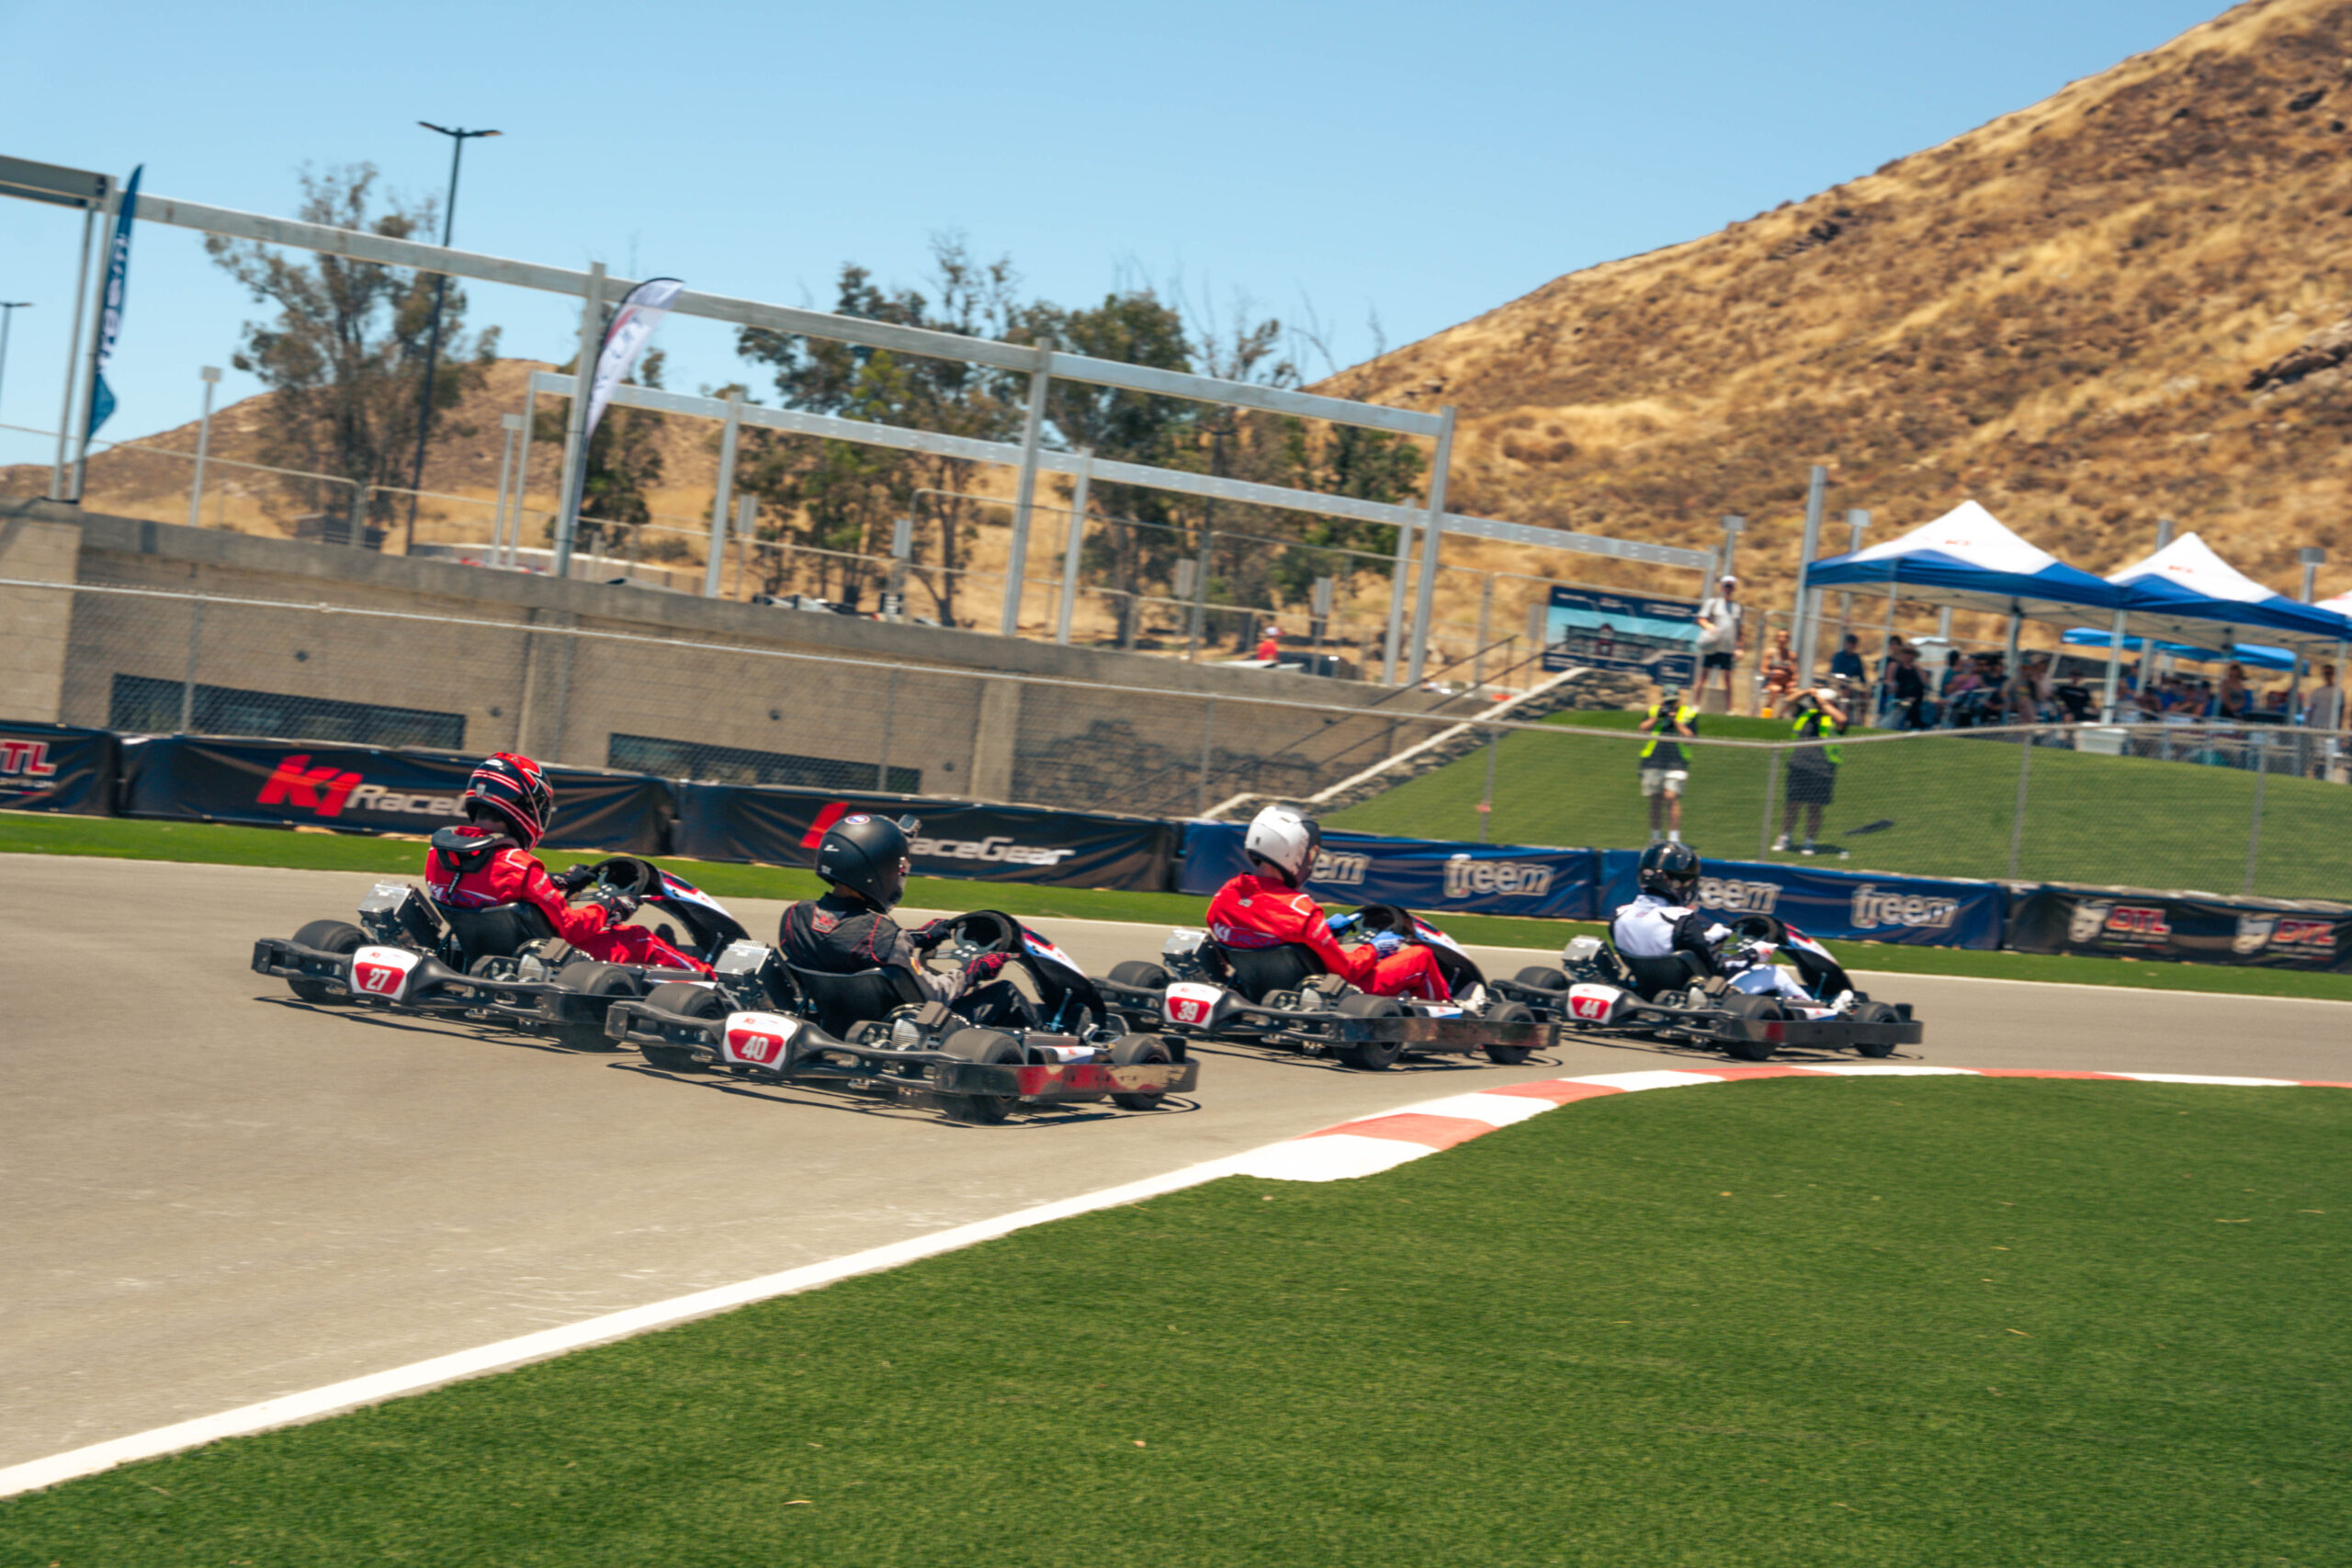 a group of karts heads into turn 1 at k1 circuit